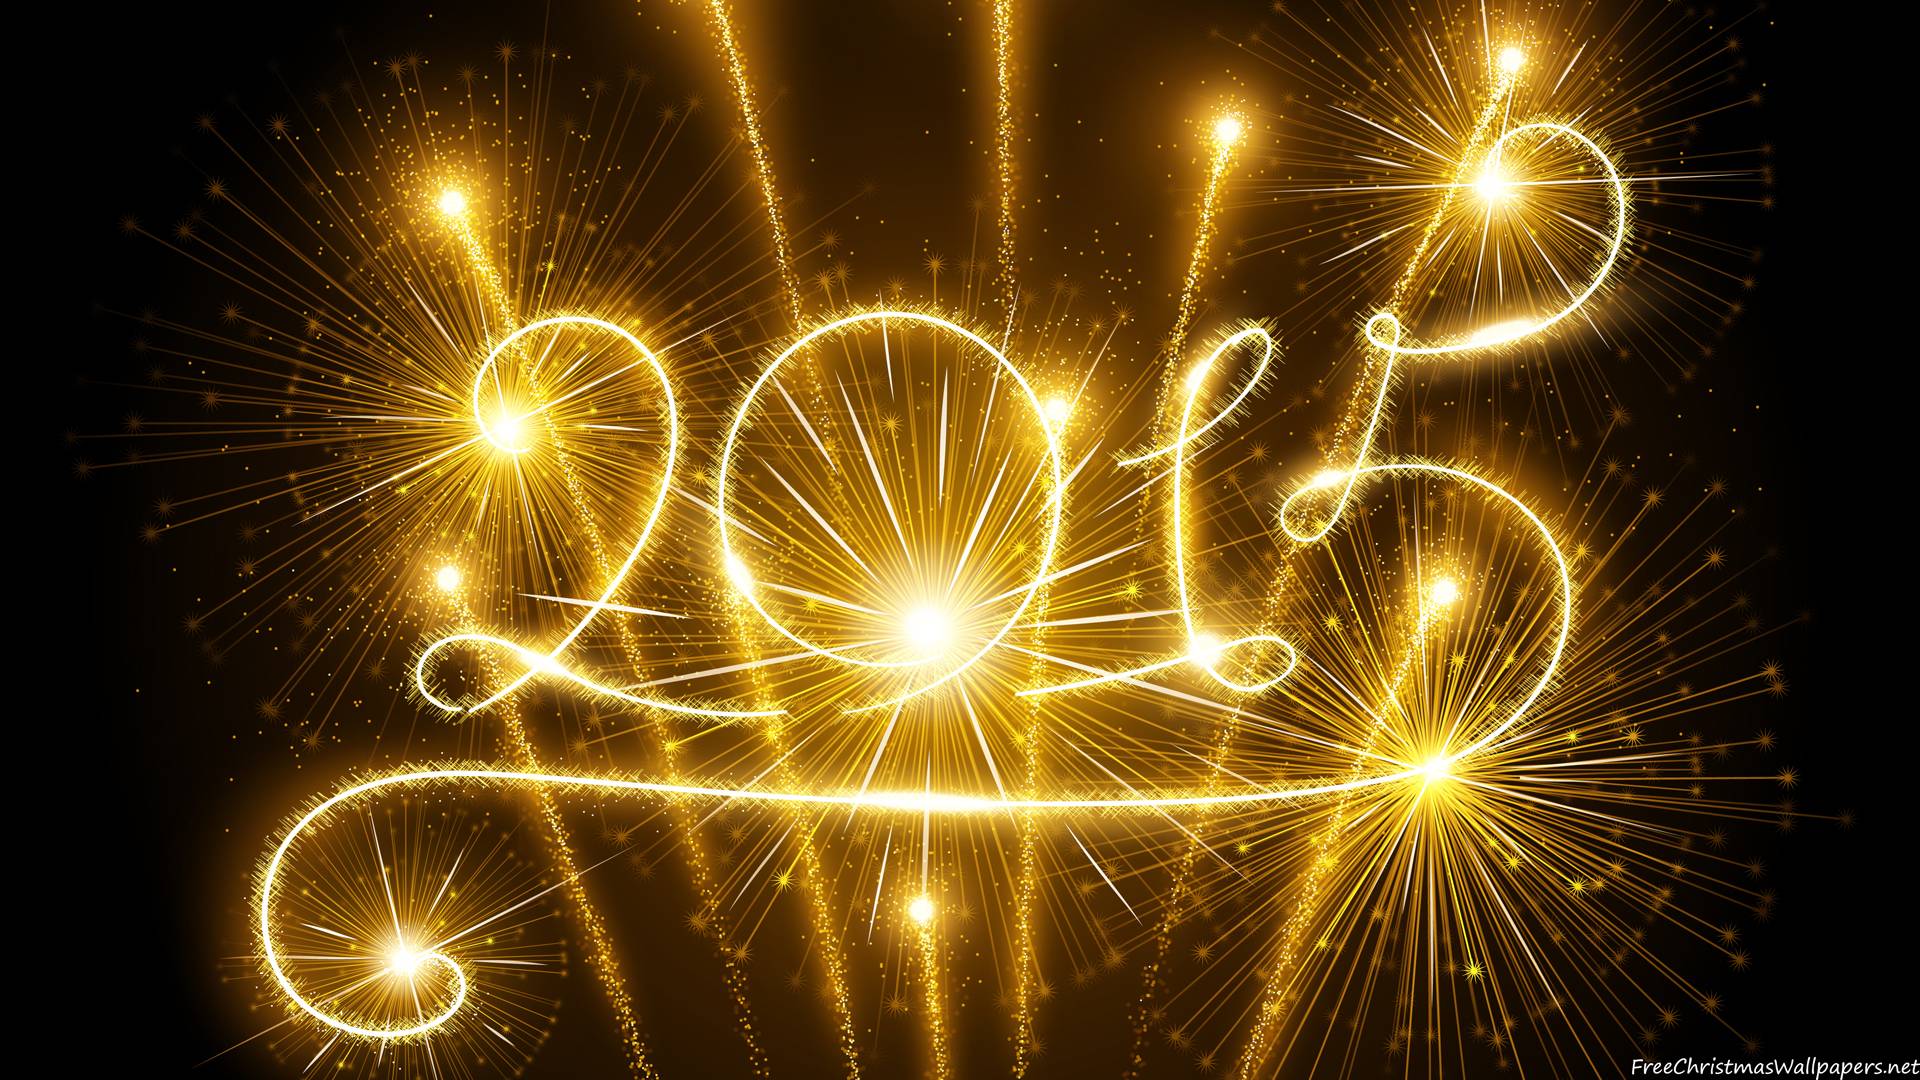 Happy New Year 2015 Advance HD Wallpaper Image Photo Picture